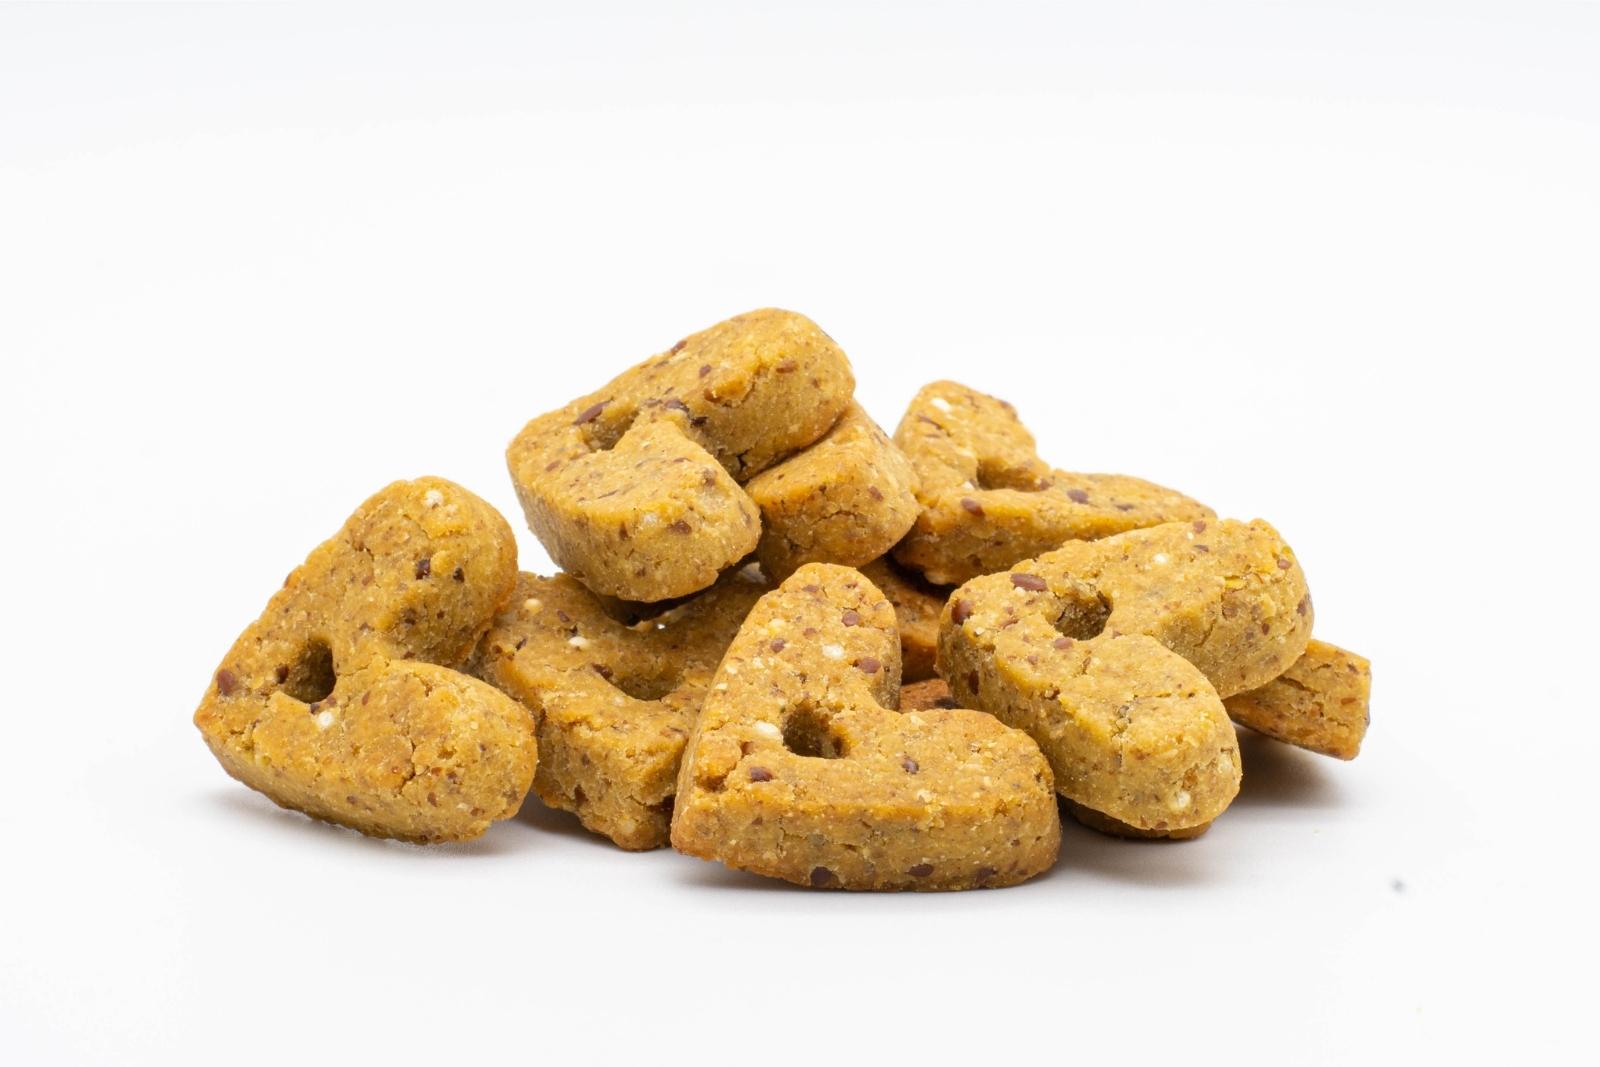 A pile of peanut butter flavored CBD Dog Treats by Head and Heal, on a white background